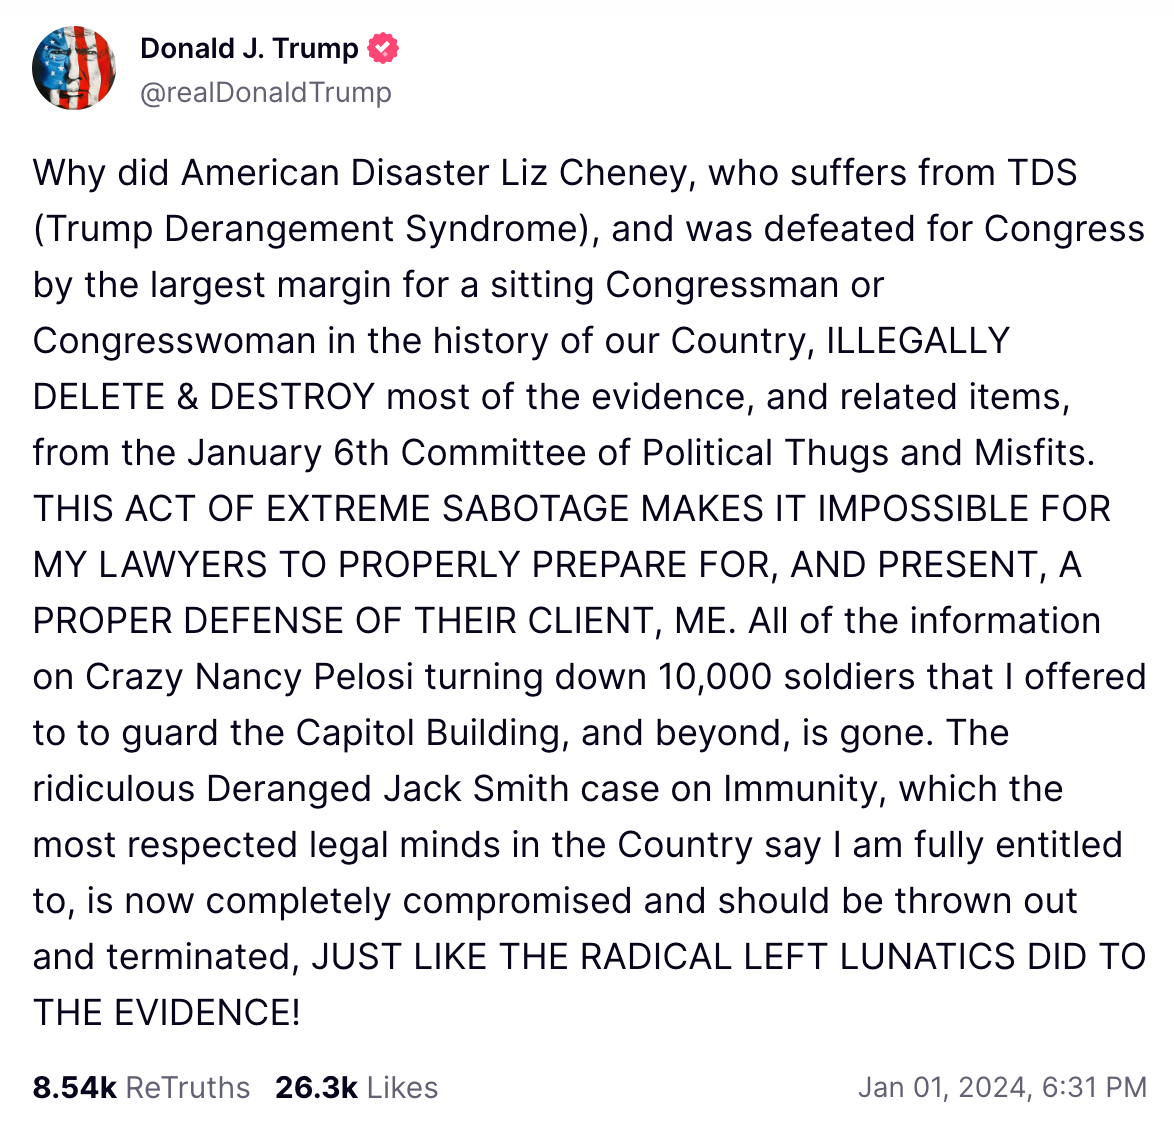 Why did American Disaster Liz Cheney, who suffers from TDS (Trump Derangement Syndrome), and was defeated for Congress by the largest margin for a sitting Congressman or Congresswoman in the history of our Country, ILLEGALLY DELETE & DESTROY most of the evidence, and related items, from the January 6th Committee of Political Thugs and Misfits. THIS ACT OF EXTREME SABOTAGE MAKES IT IMPOSSIBLE FOR MY LAWYERS TO PROPERLY PREPARE FOR, AND PRESENT, A PROPER DEFENSE OF THEIR CLIENT, ME. All of the information on Crazy Nancy Pelosi turning down 10,000 soldiers that I offered to to guard the Capitol Building, and beyond, is gone. The ridiculous Deranged Jack Smith case on Immunity, which the most respected legal minds in the Country say I am fully entitled to, is now completely compromised and should be thrown out and terminated, JUST LIKE THE RADICAL LEFT LUNATICS DID TO THE EVIDENCE!